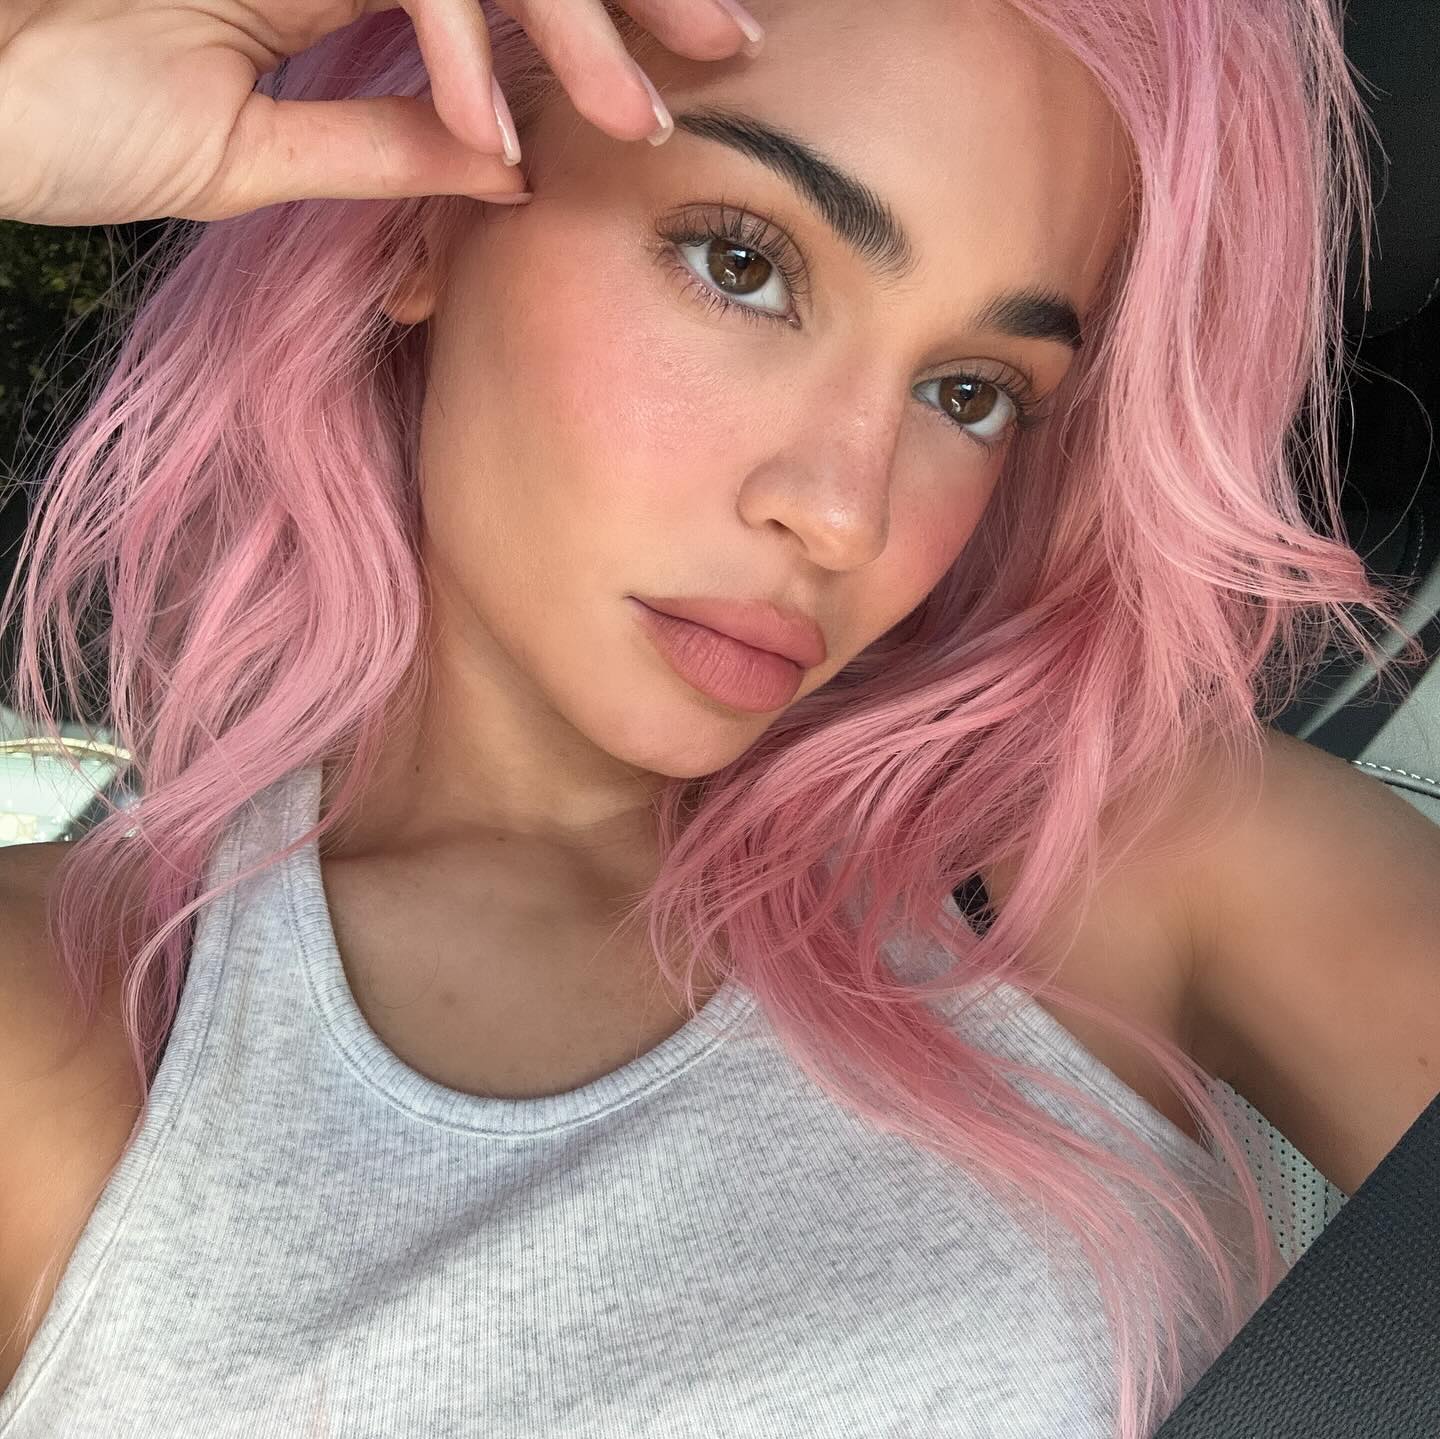 Fans thought that Kylie's outfit would've looked better with the pink hair she debuted last week